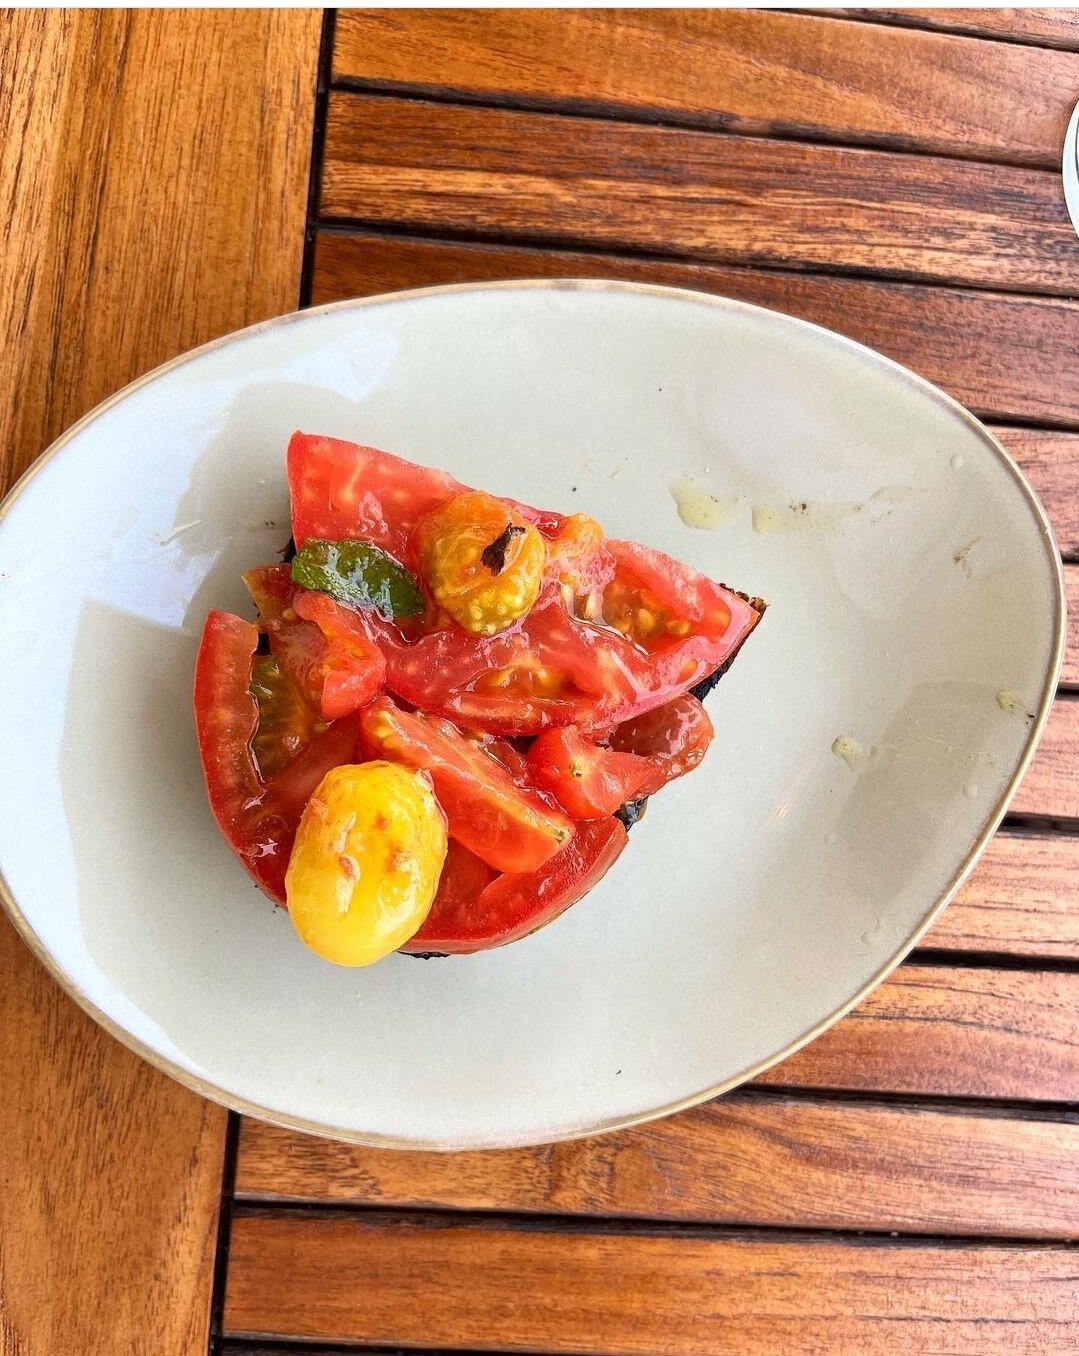 Via Mare’s Tomato Toast is spread thinly with tomato jam, then topped with beefy heirloom and blistered cherry tomatoes from Fog Town Farm.